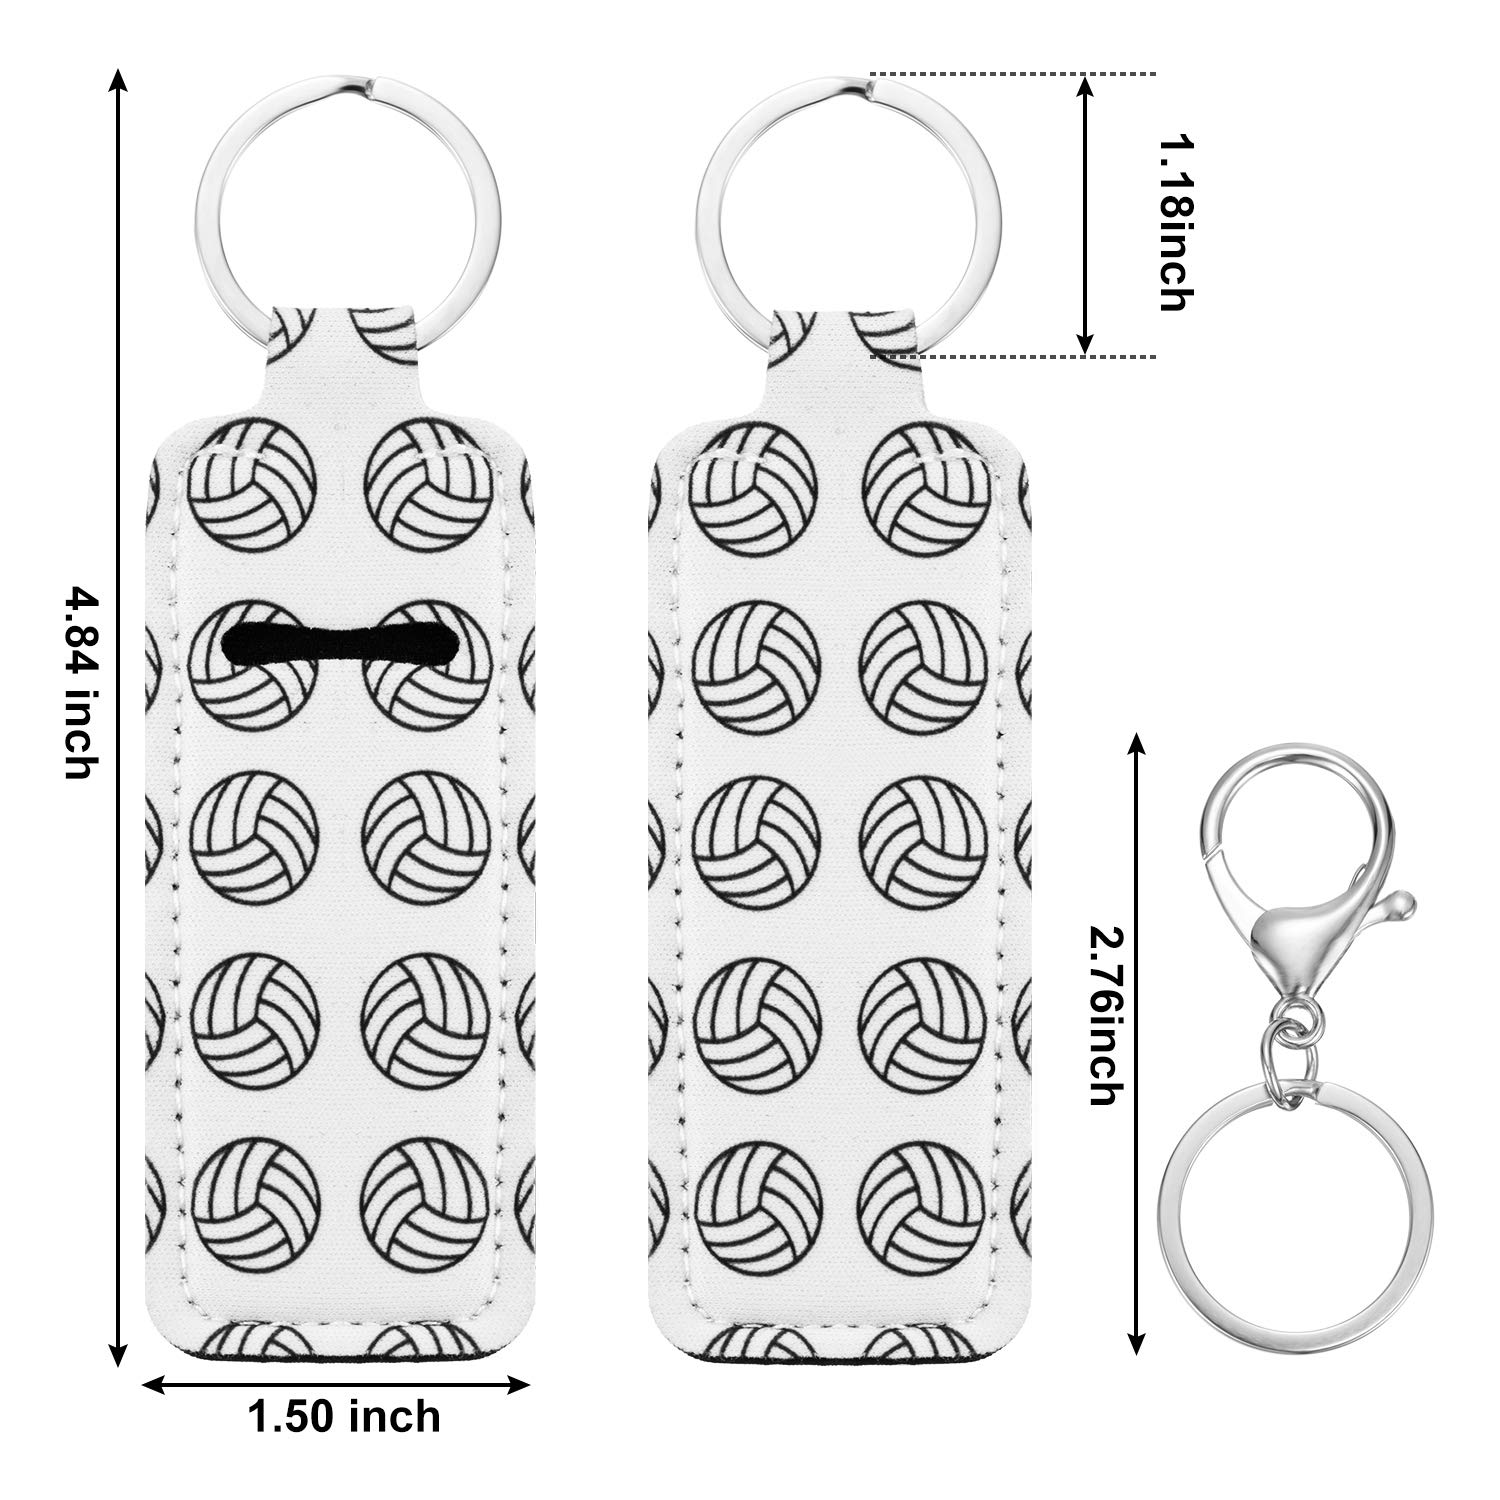 16 Pieces Volleyball Lipstick Holder Keychains Volleyball Lipstick Balm Holder Keychain Clip-on Lipstick Sleeve Pouch with 16 Pieces Metal Clip Cords for Lipstick Tracker